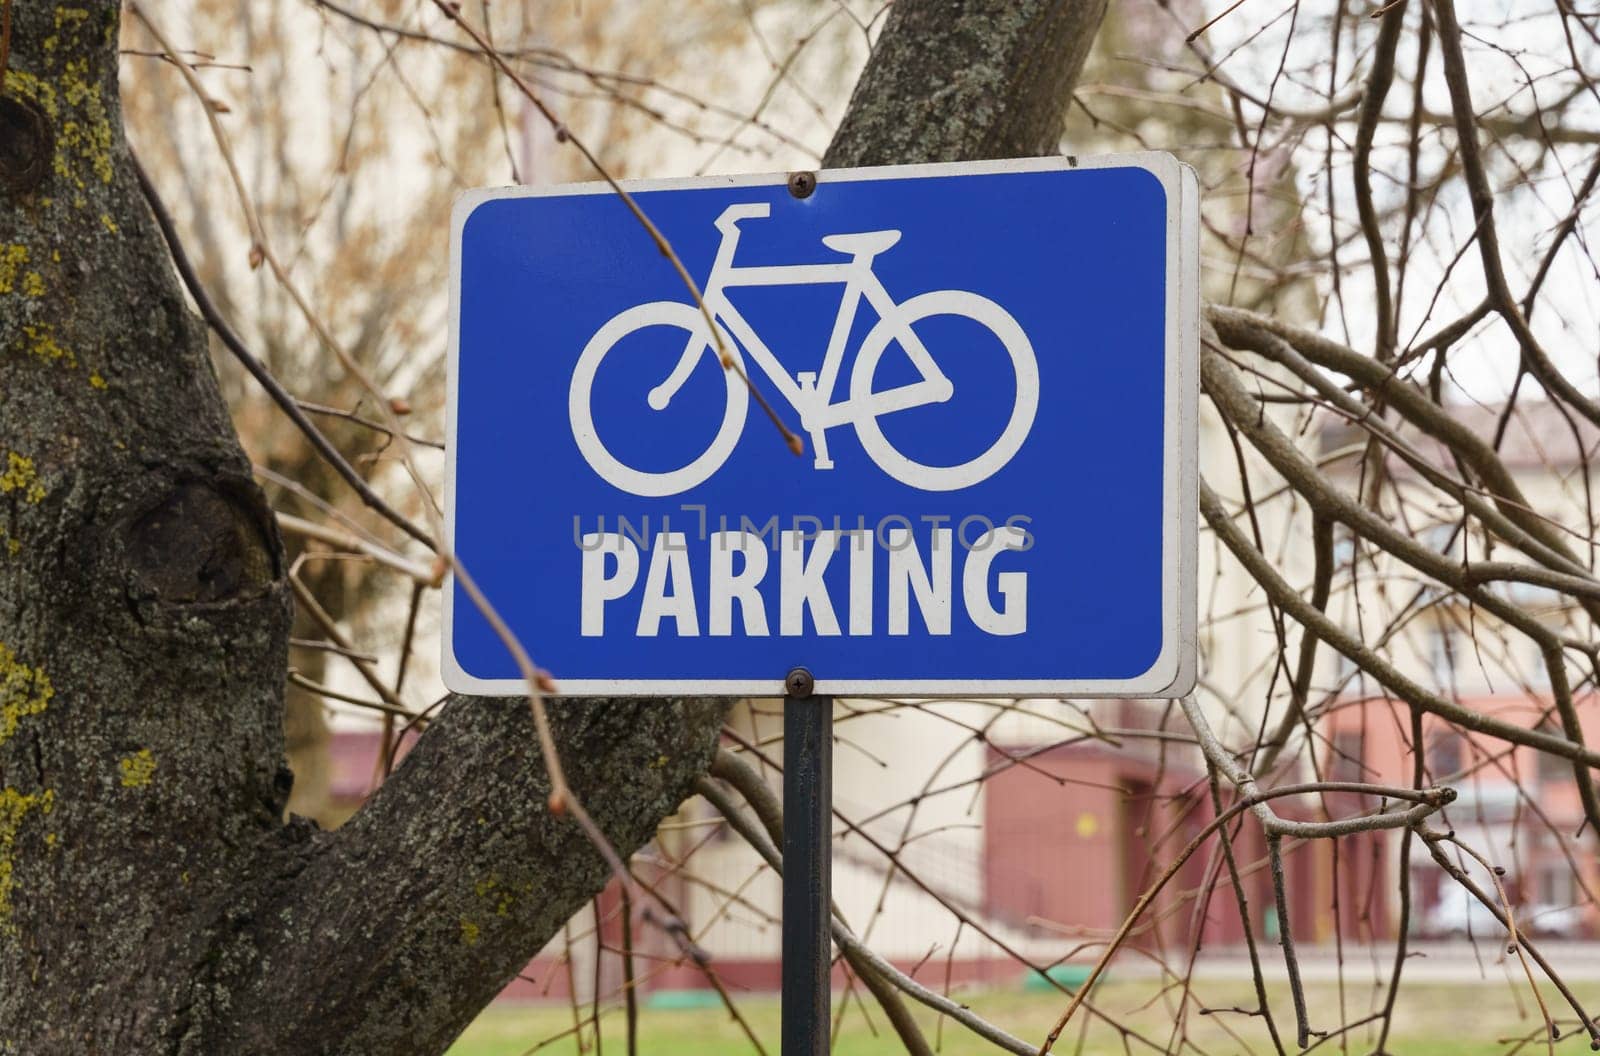 Road sign parking for bicycles. by Sd28DimoN_1976